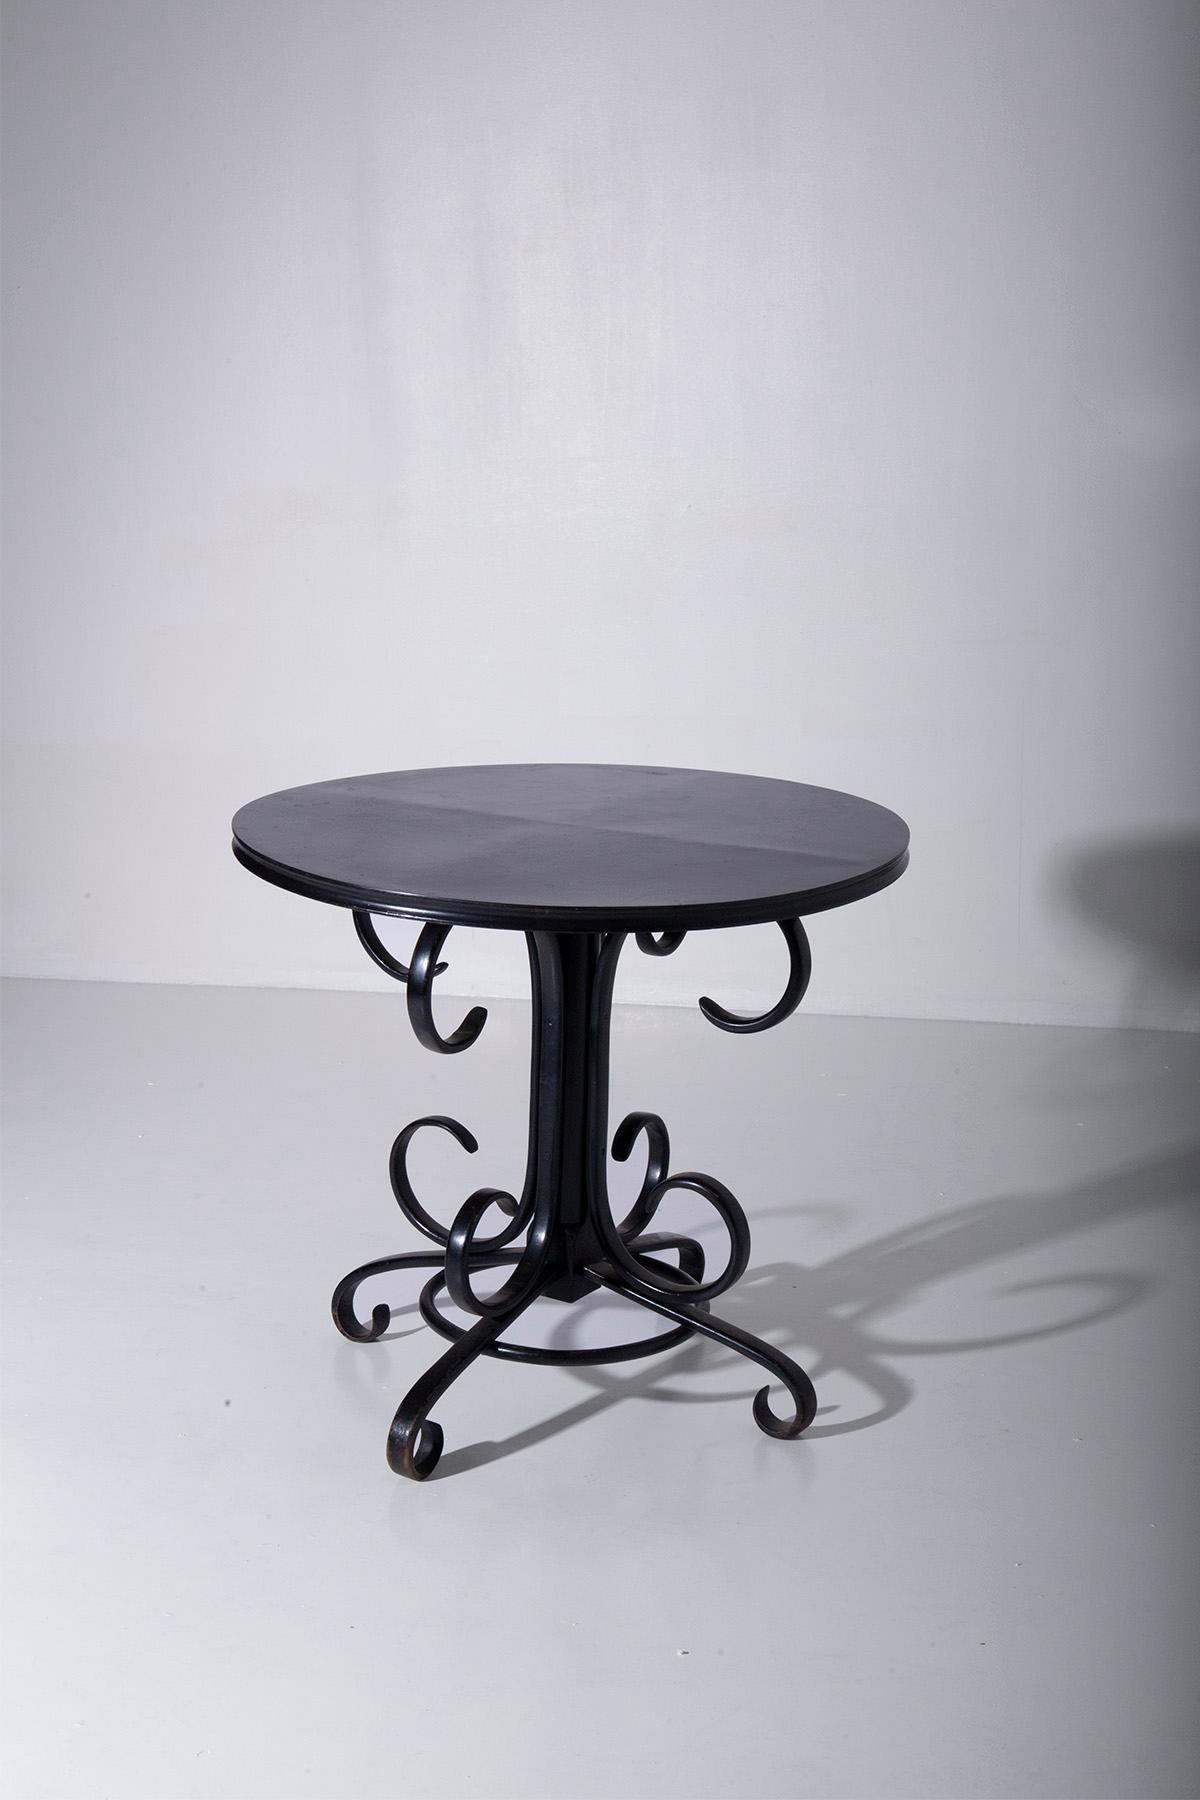 Imagine a tall, elegant center table from the early 1900s, a true testament to the opulence and sophistication of the Art Deco era. This exquisite piece is a work of glamour in itself, crafted from lustrous black lacquered wood.

What immediately